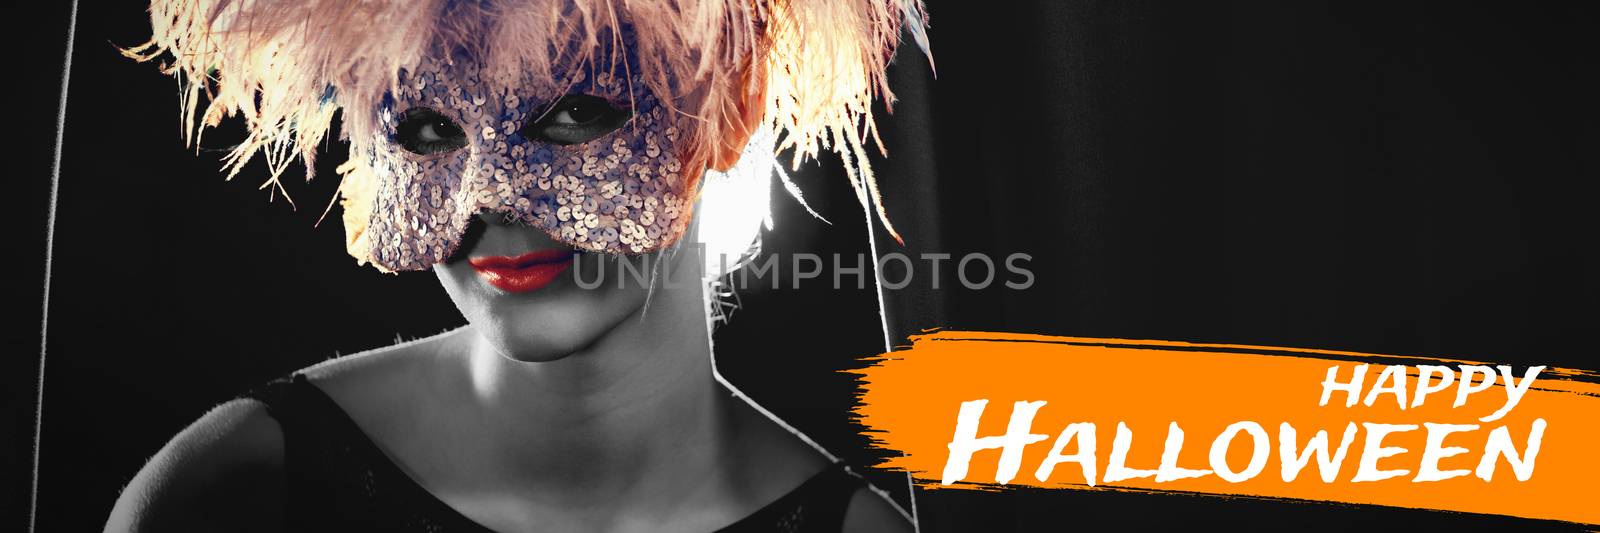 Digital image of happy Halloween text against portrait of woman in masquerade mask and wig